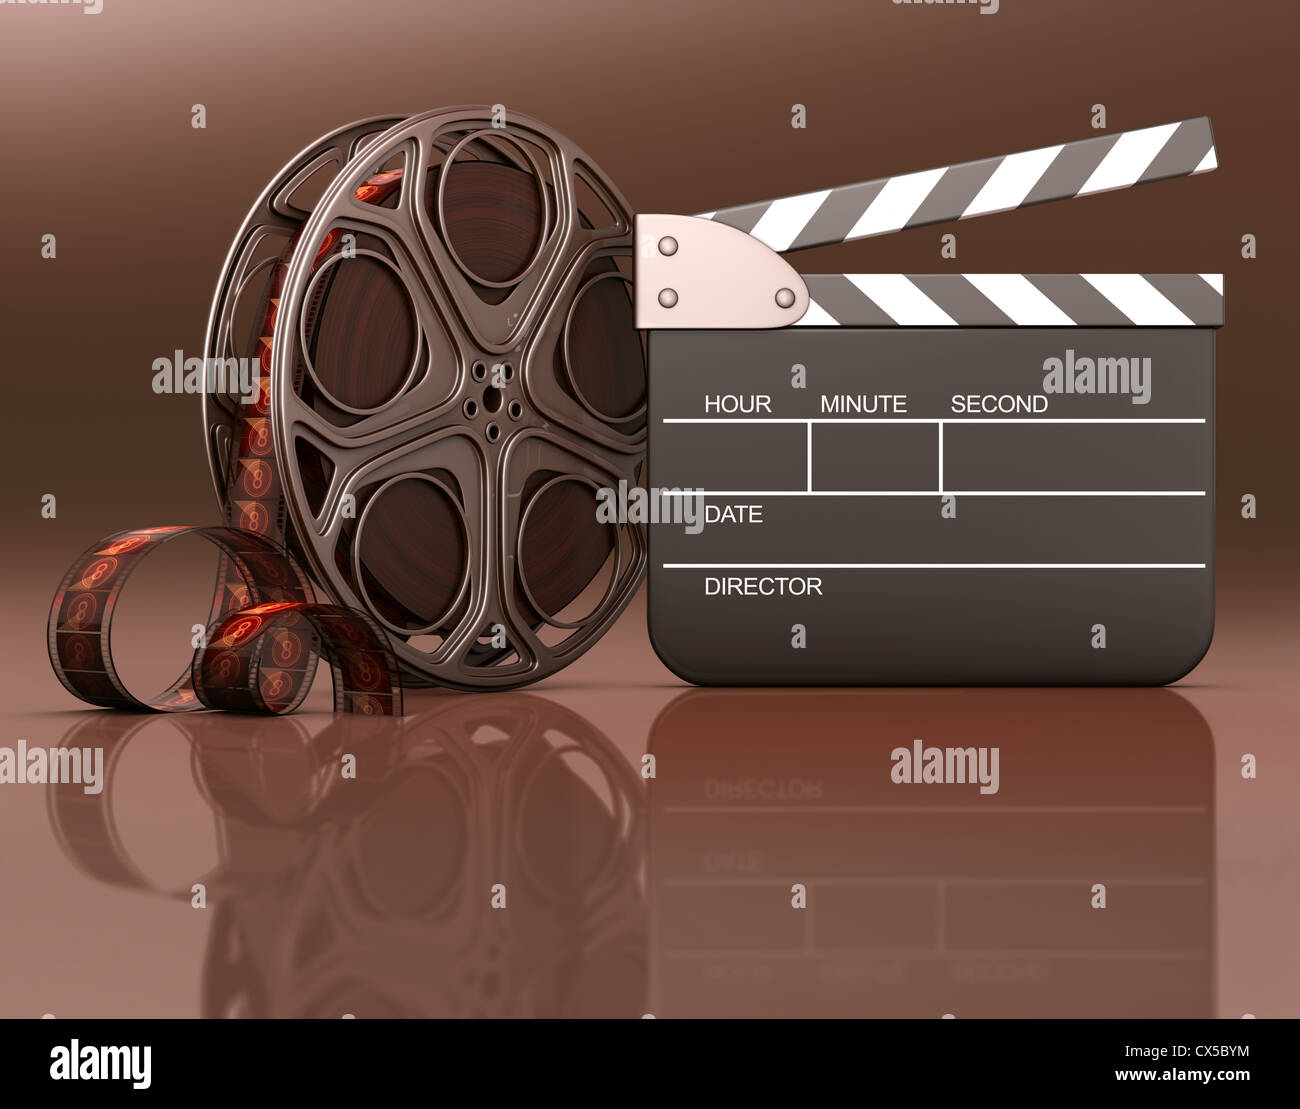 Roll of film with a clapboard beside. Your info on the black space of the clapboard or under the roll and clapboard. Stock Photo